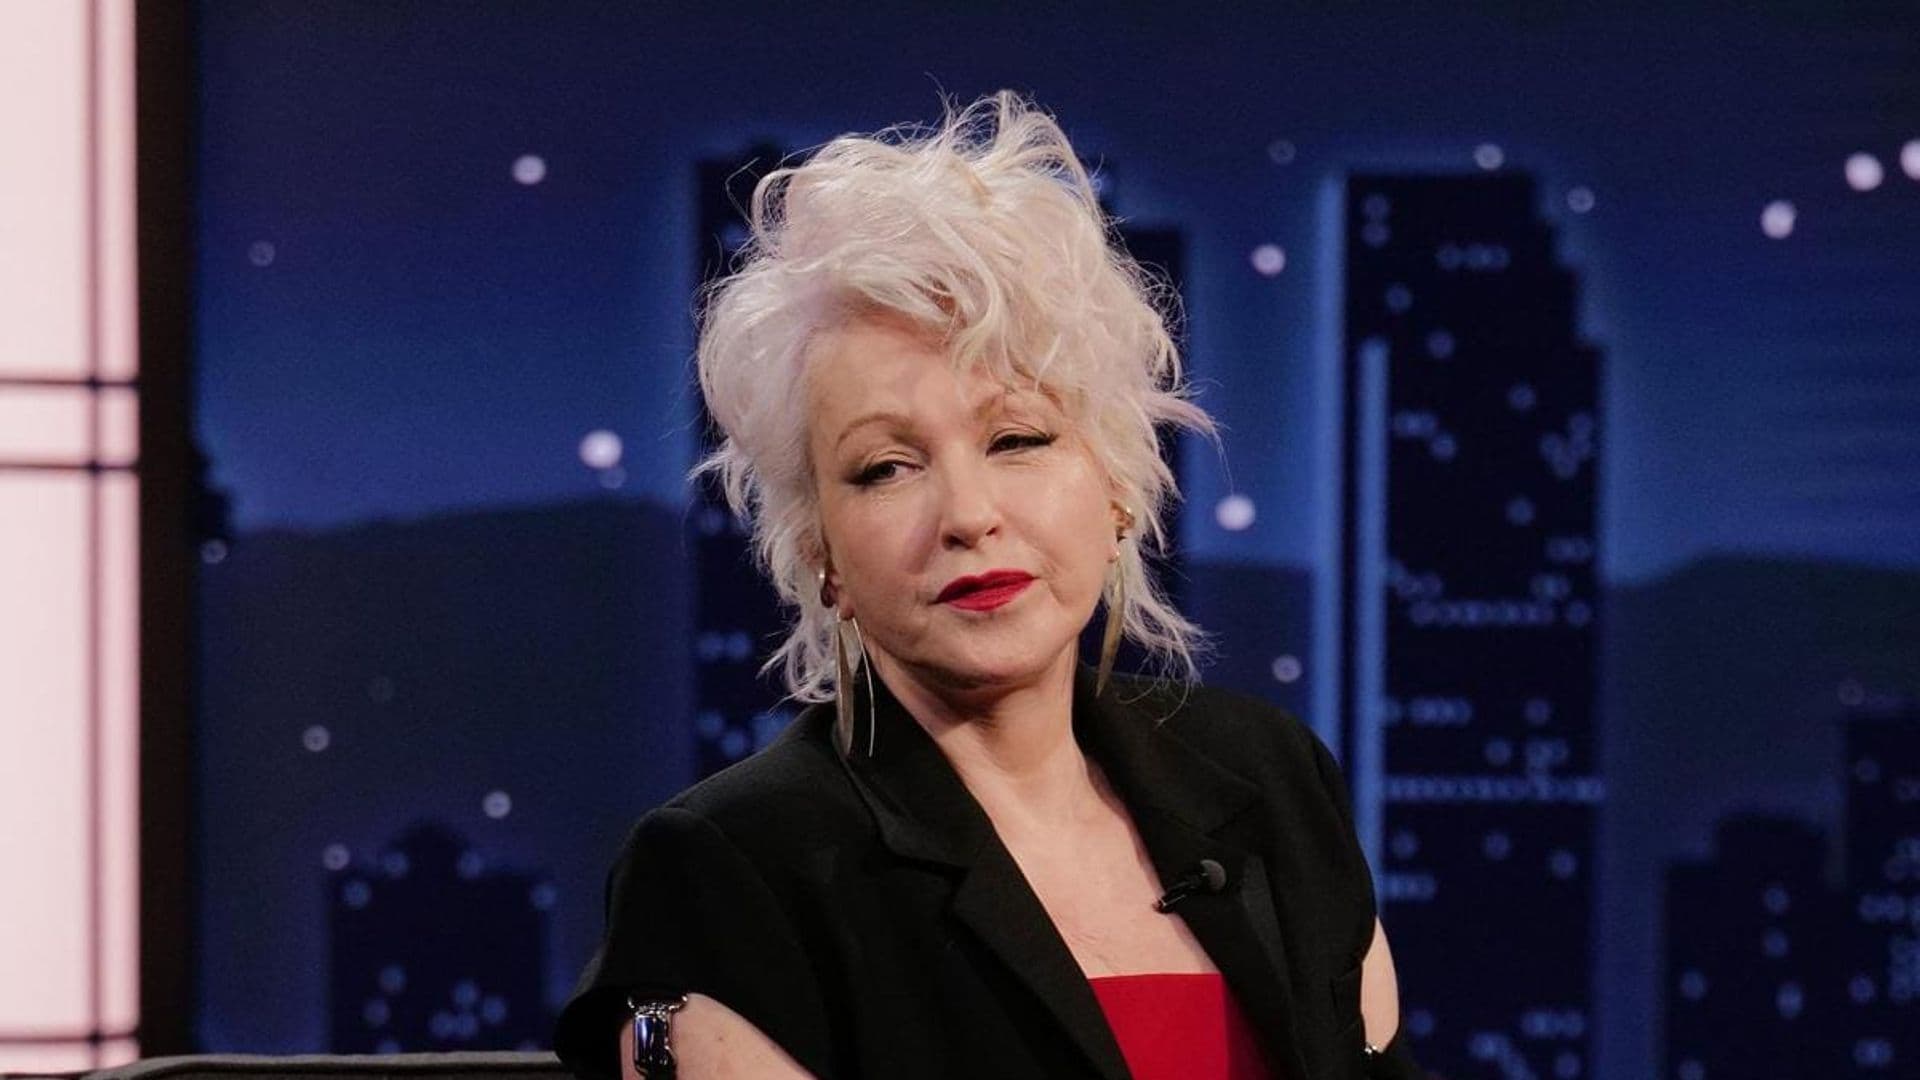 Cyndi Lauper reflects on rivalry with Madonna during their rise to fame in the 1980s